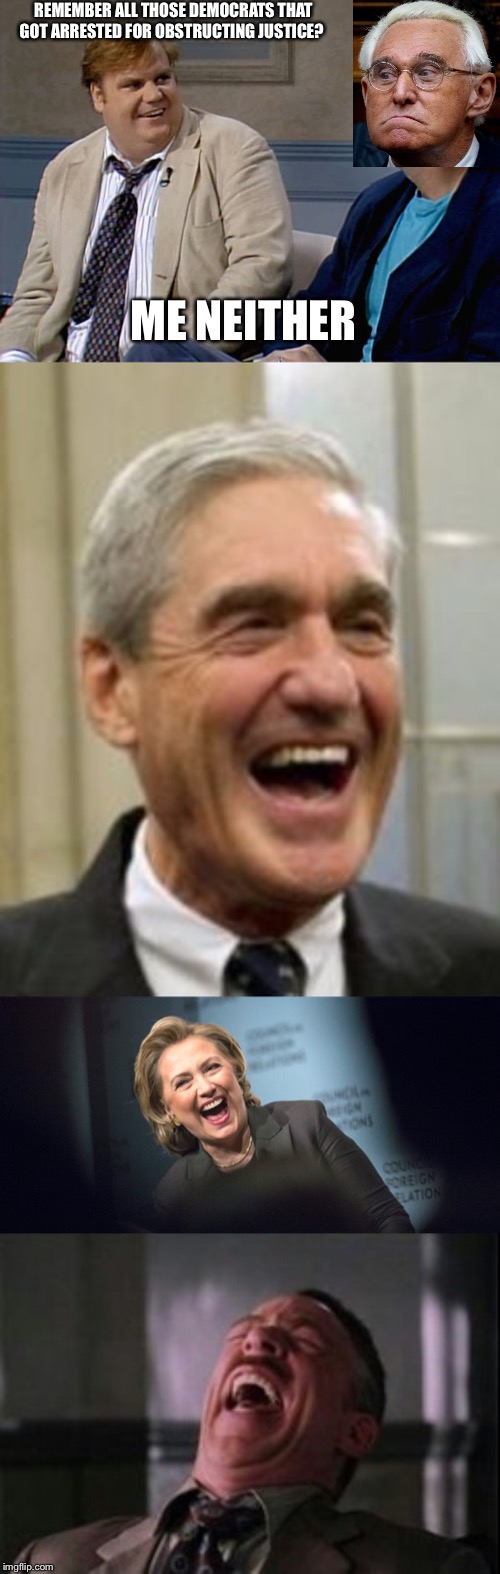 REMEMBER ALL THOSE DEMOCRATS THAT GOT ARRESTED FOR OBSTRUCTING JUSTICE? ME NEITHER | image tagged in j jonah jameson laughing,hillary laughing,mueller laughing,remember that time | made w/ Imgflip meme maker